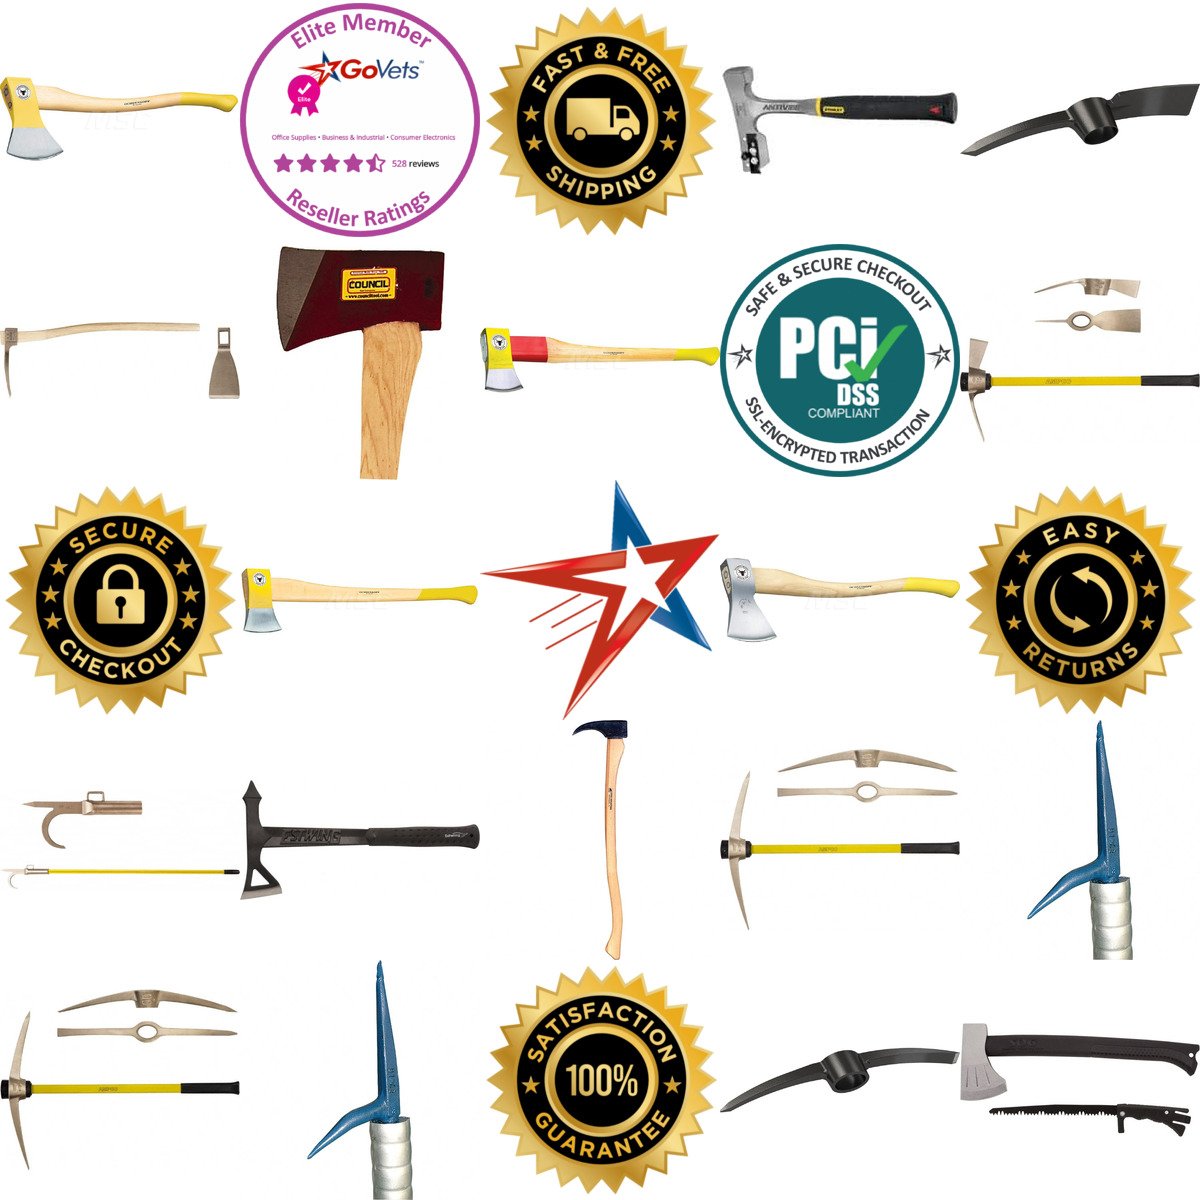 A selection of Hatchets and Axes products on GoVets